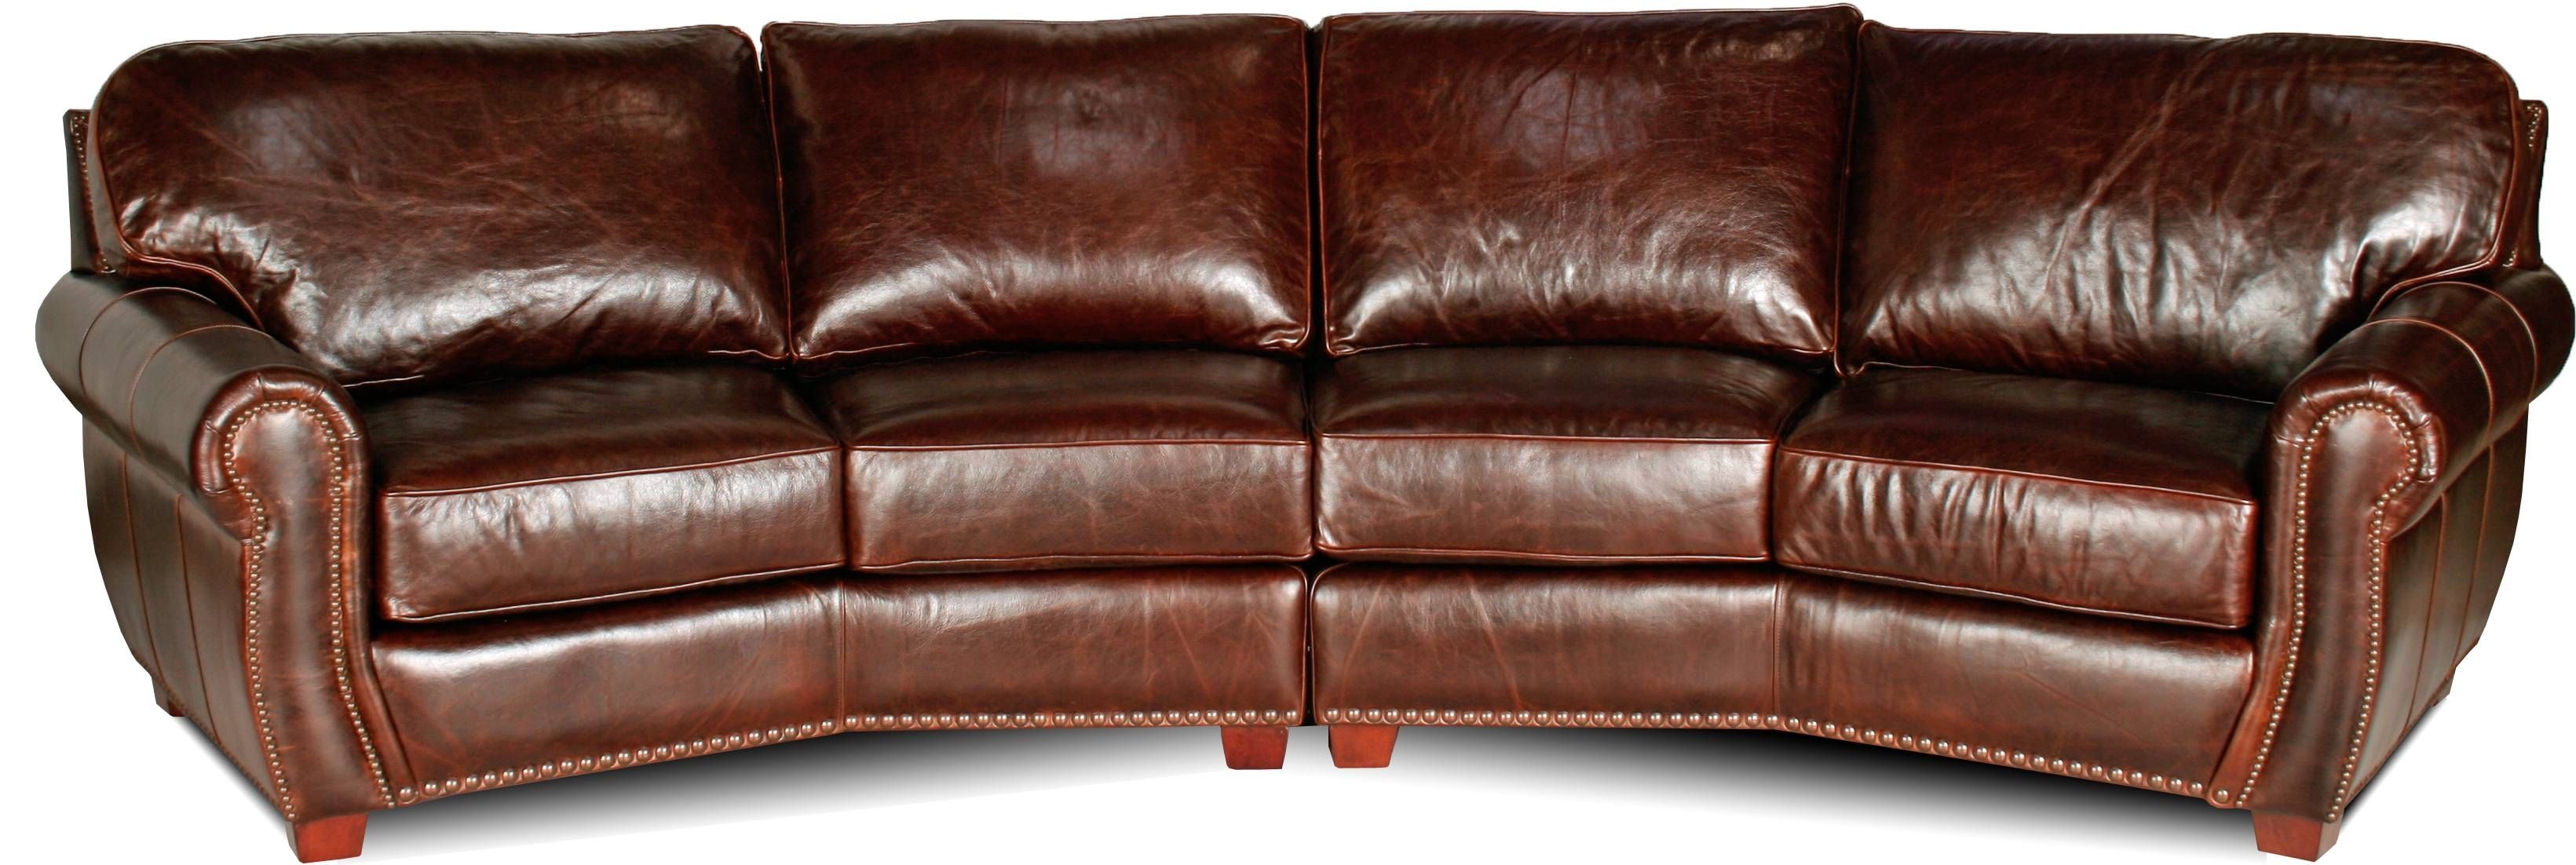 Berkshire Leather Furniture With Regard To 4 Seat Couch (View 12 of 15)